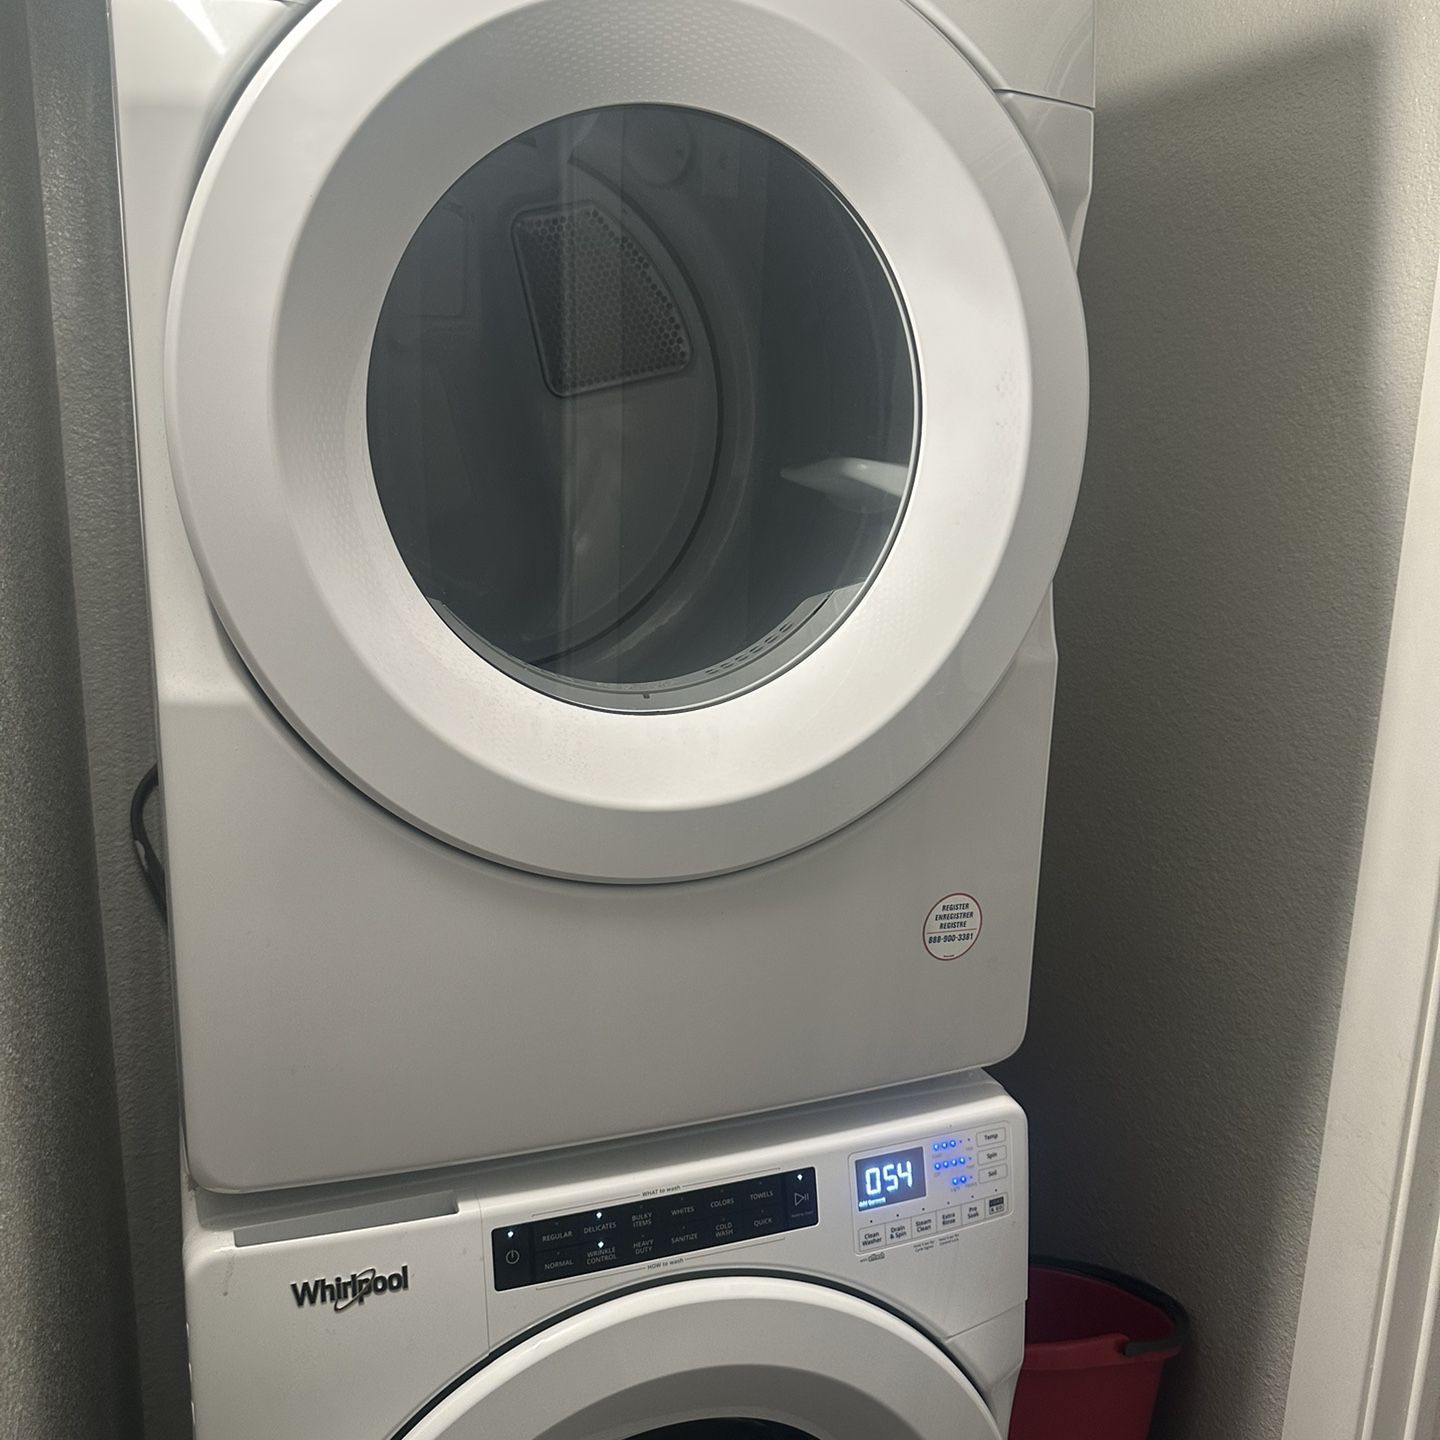 Washer And Dryer Repair 